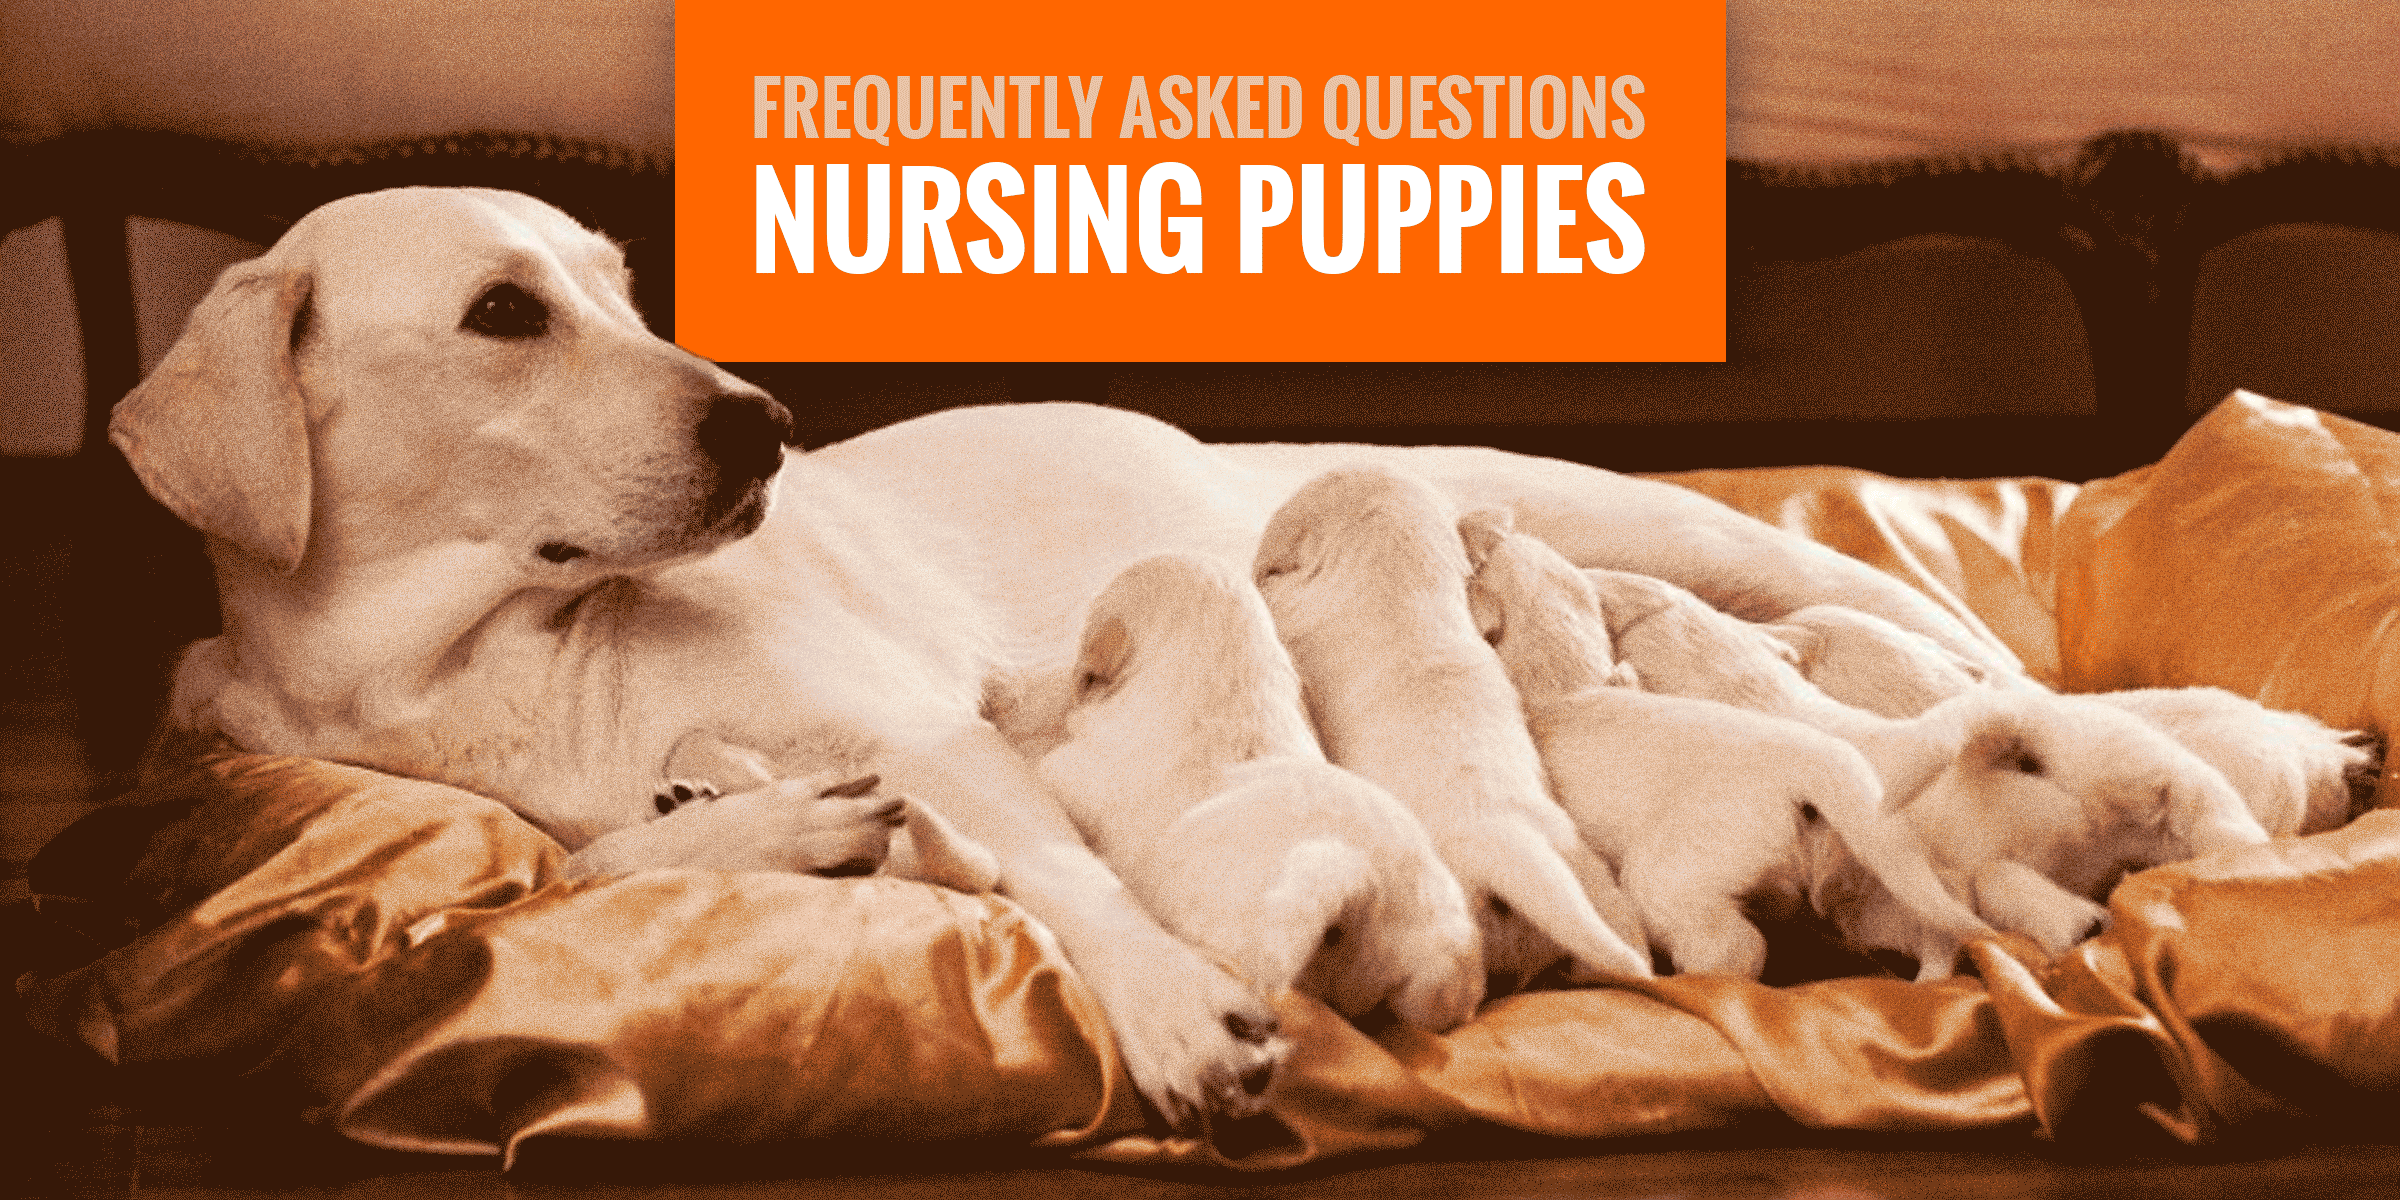 Nursing Puppies Most Frequently Asked Questions,Contemporary Interior Design